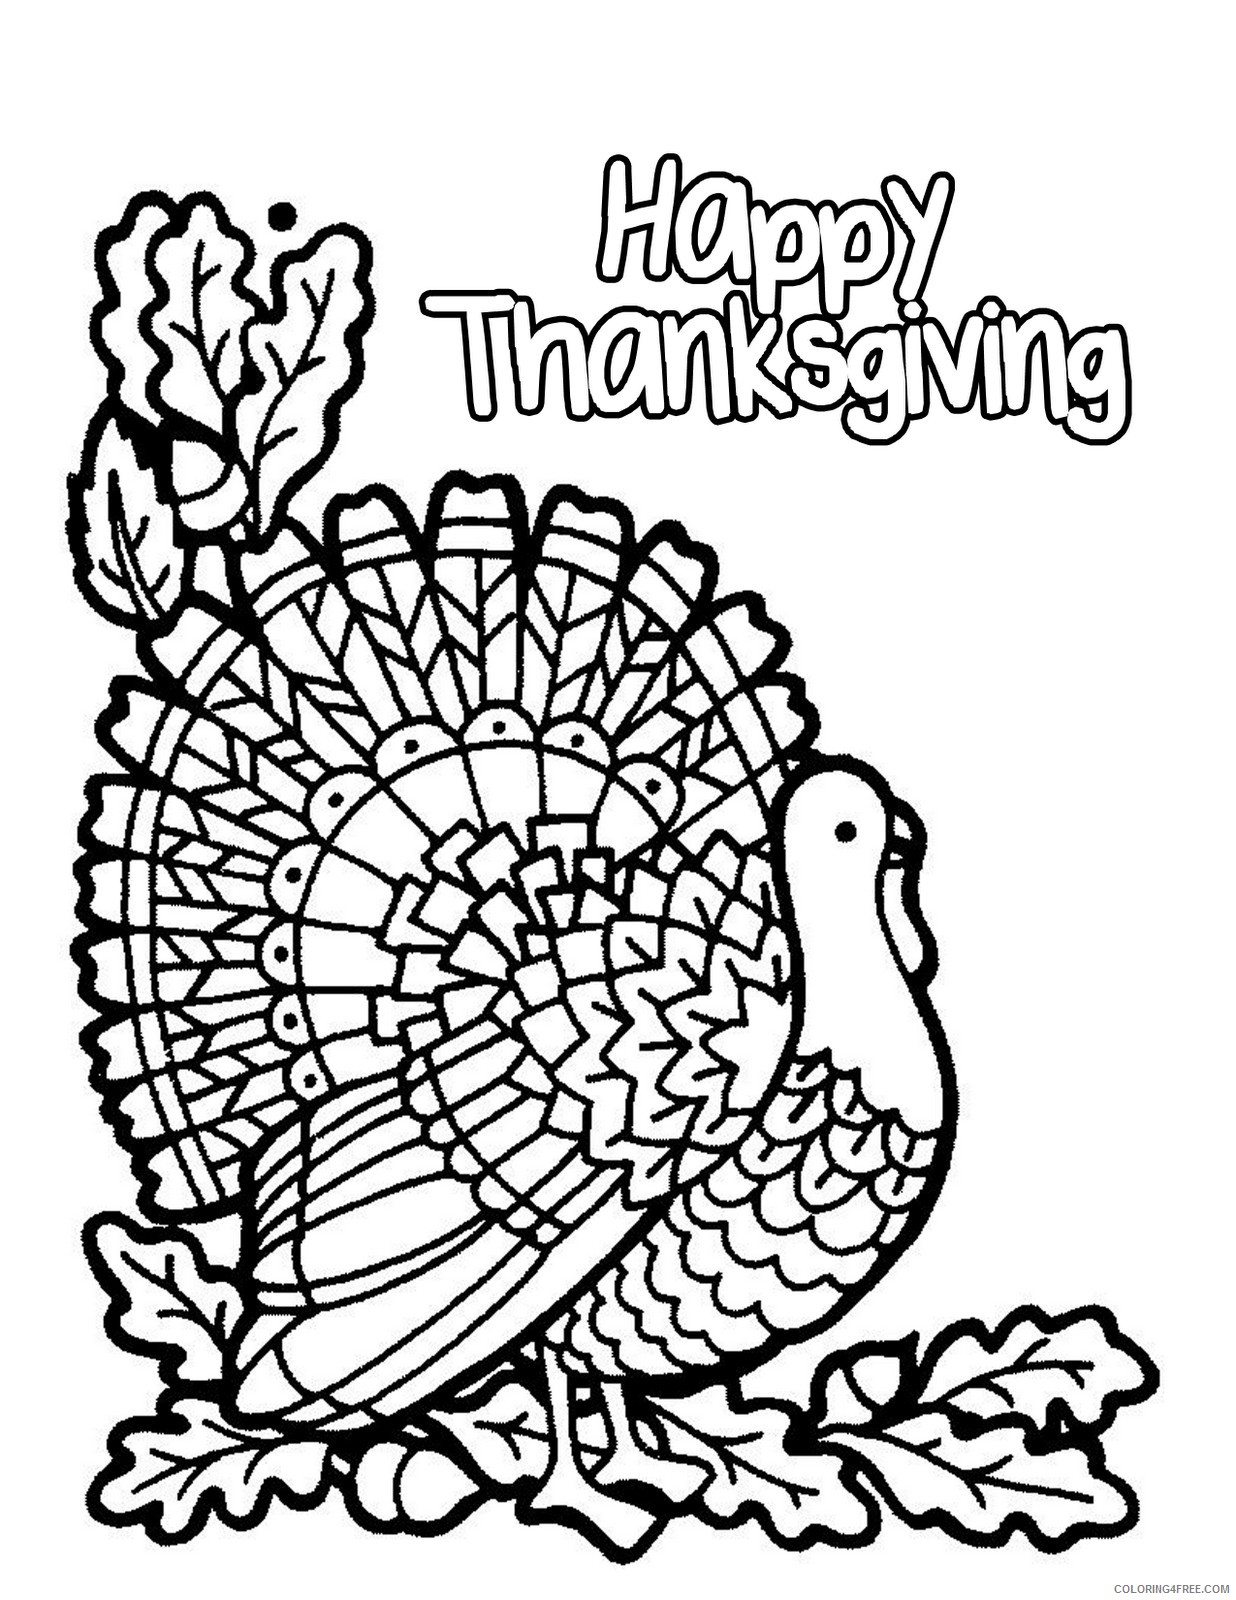 november coloring pages happy thanksgiving Coloring4free